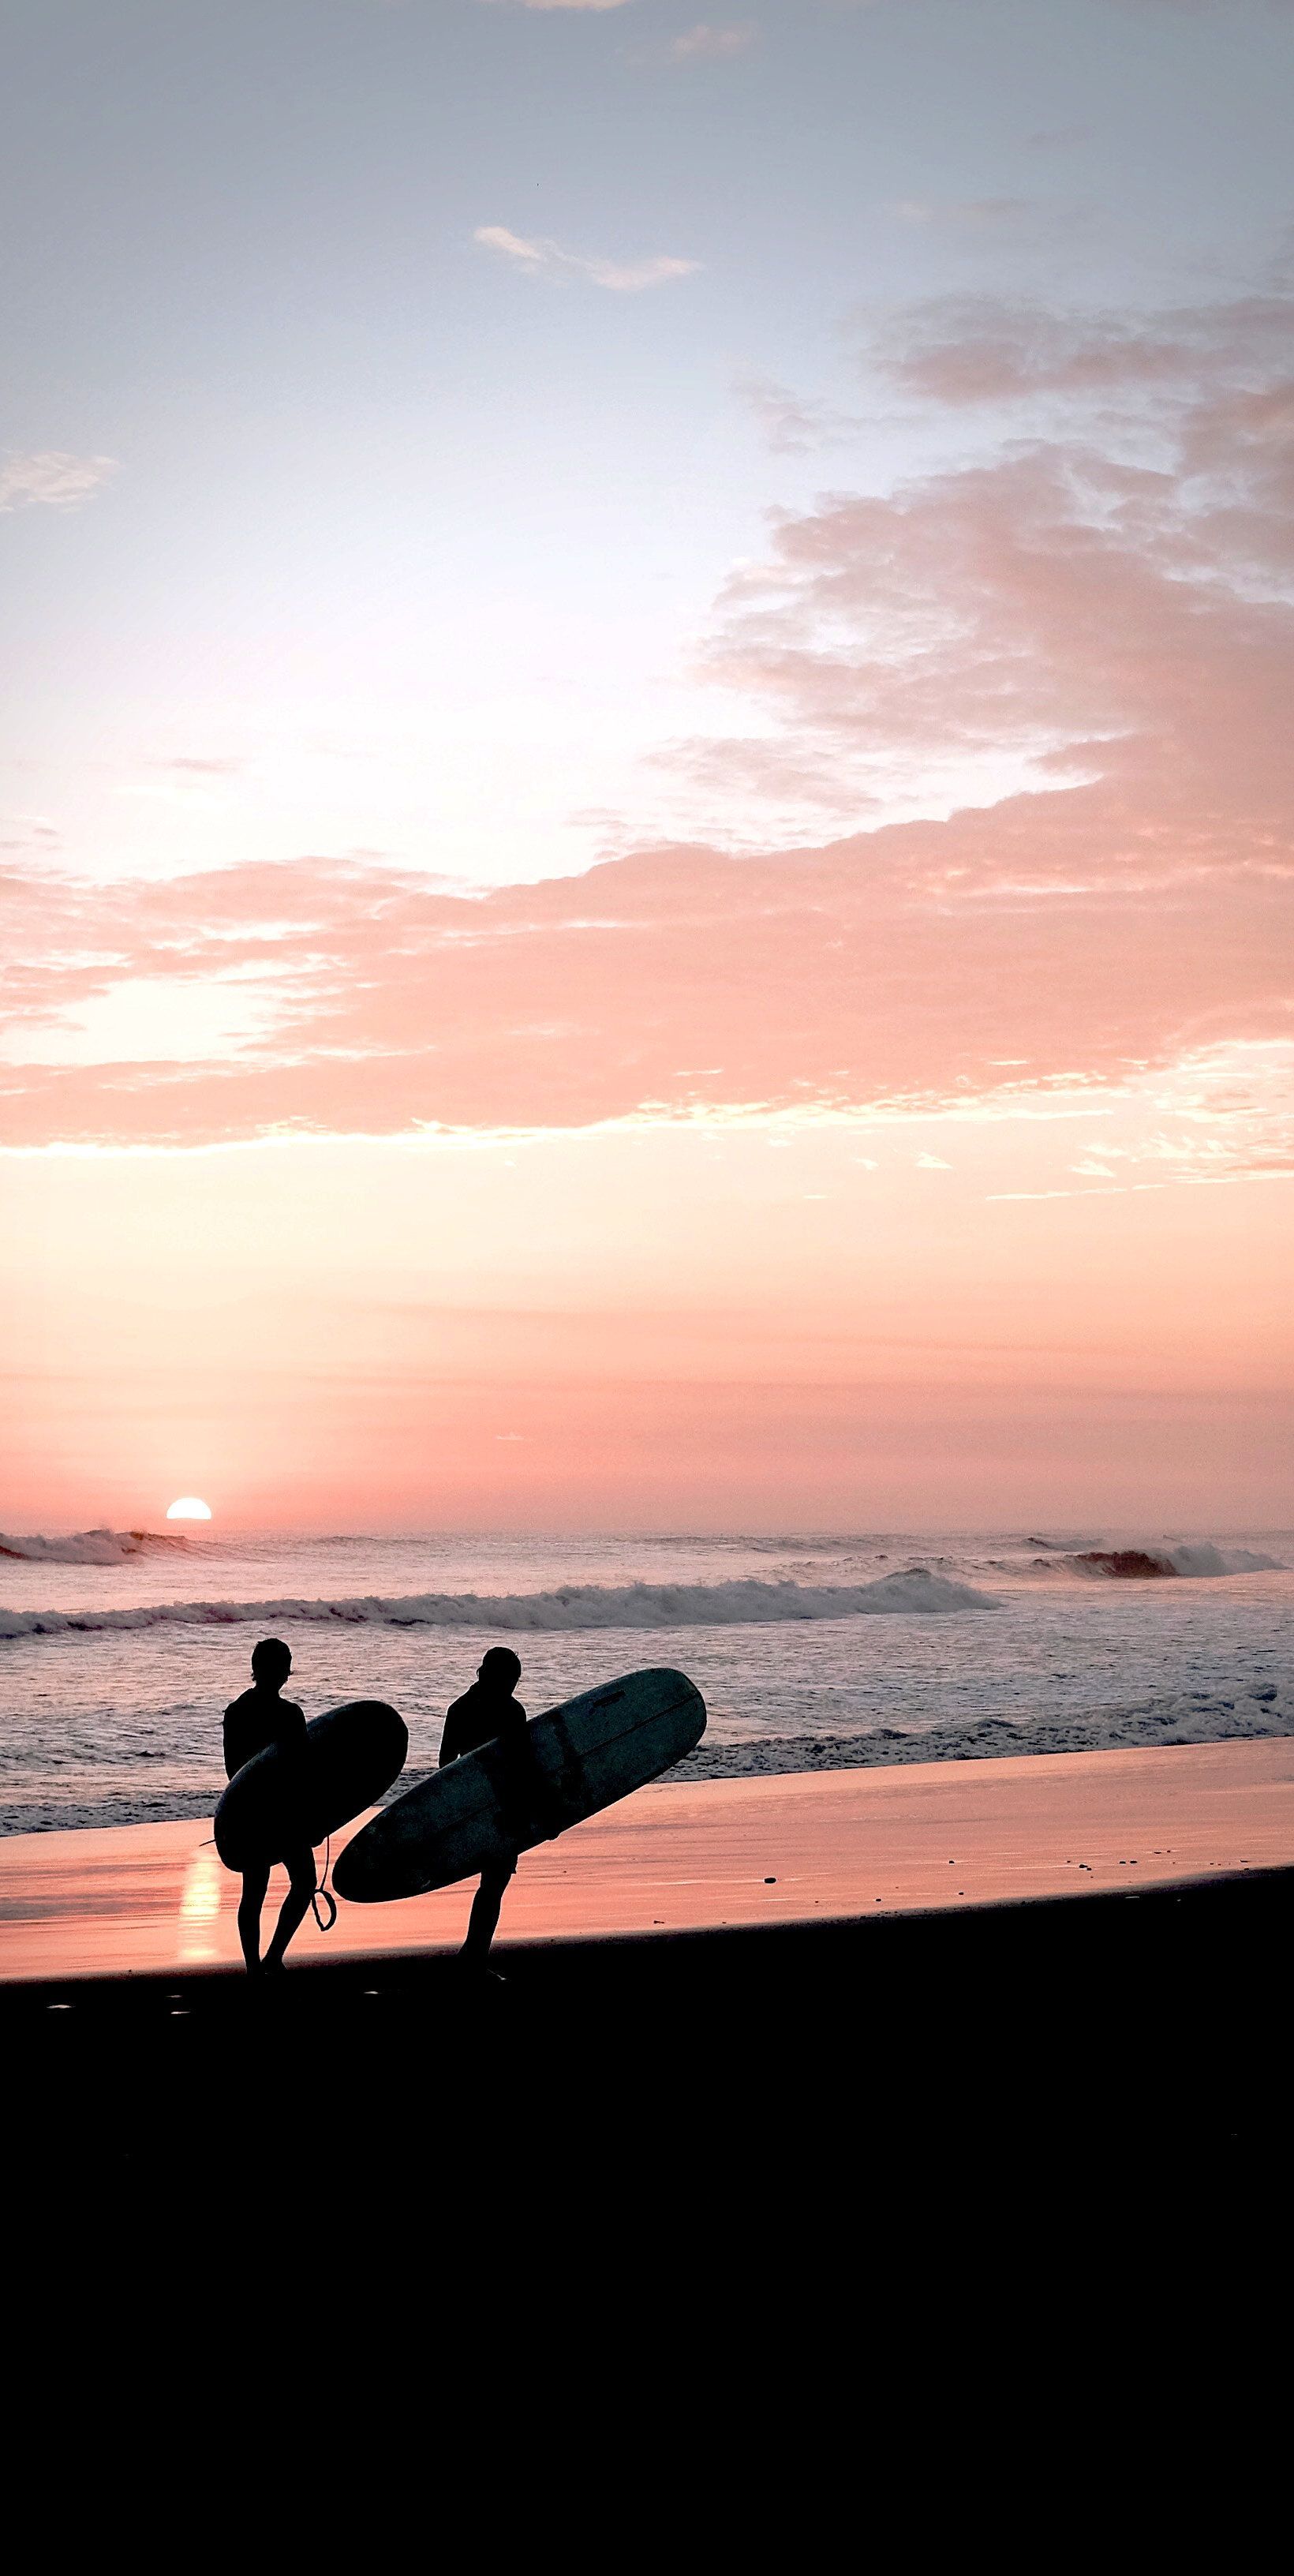 Two surfers carrying their boards along the beach at sunset. - Surf